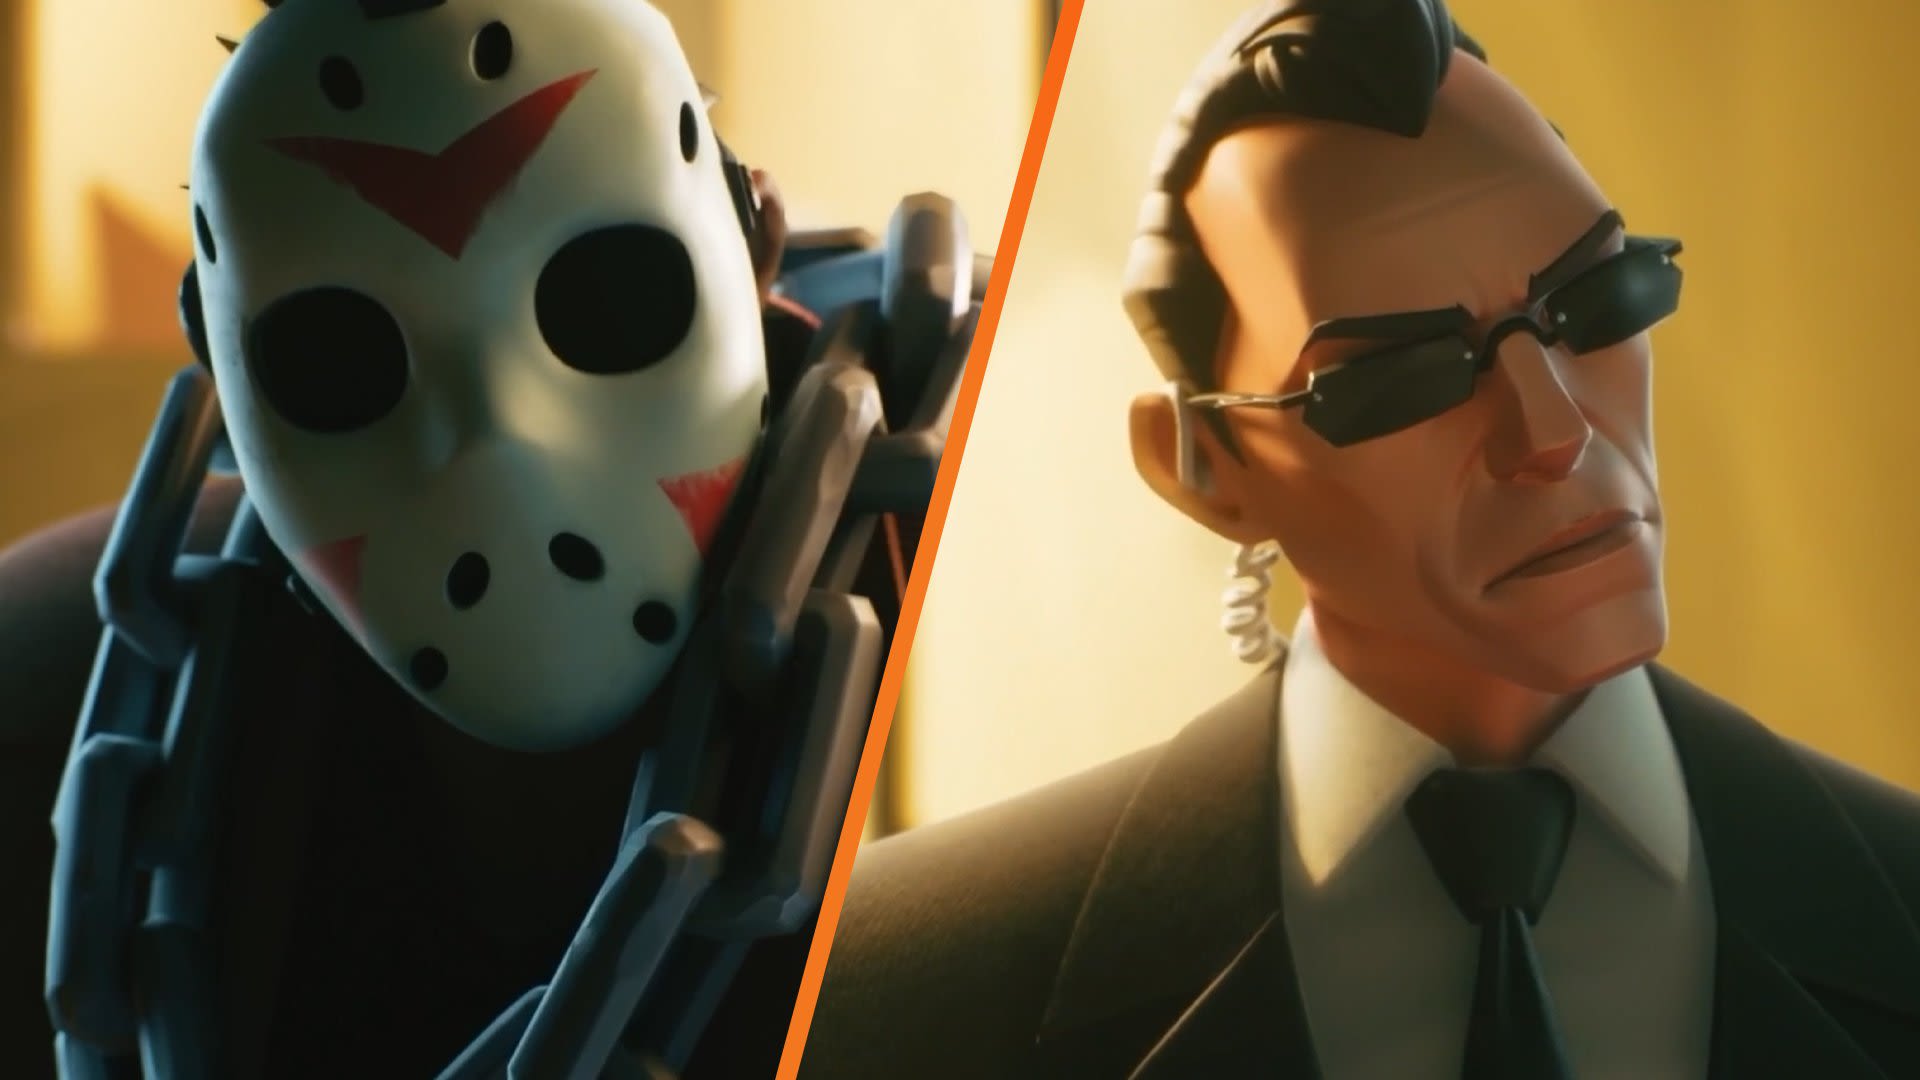 MultiVersus launch trailer reveals Jason Voorhees and Agent Smith as playable characters | VGC